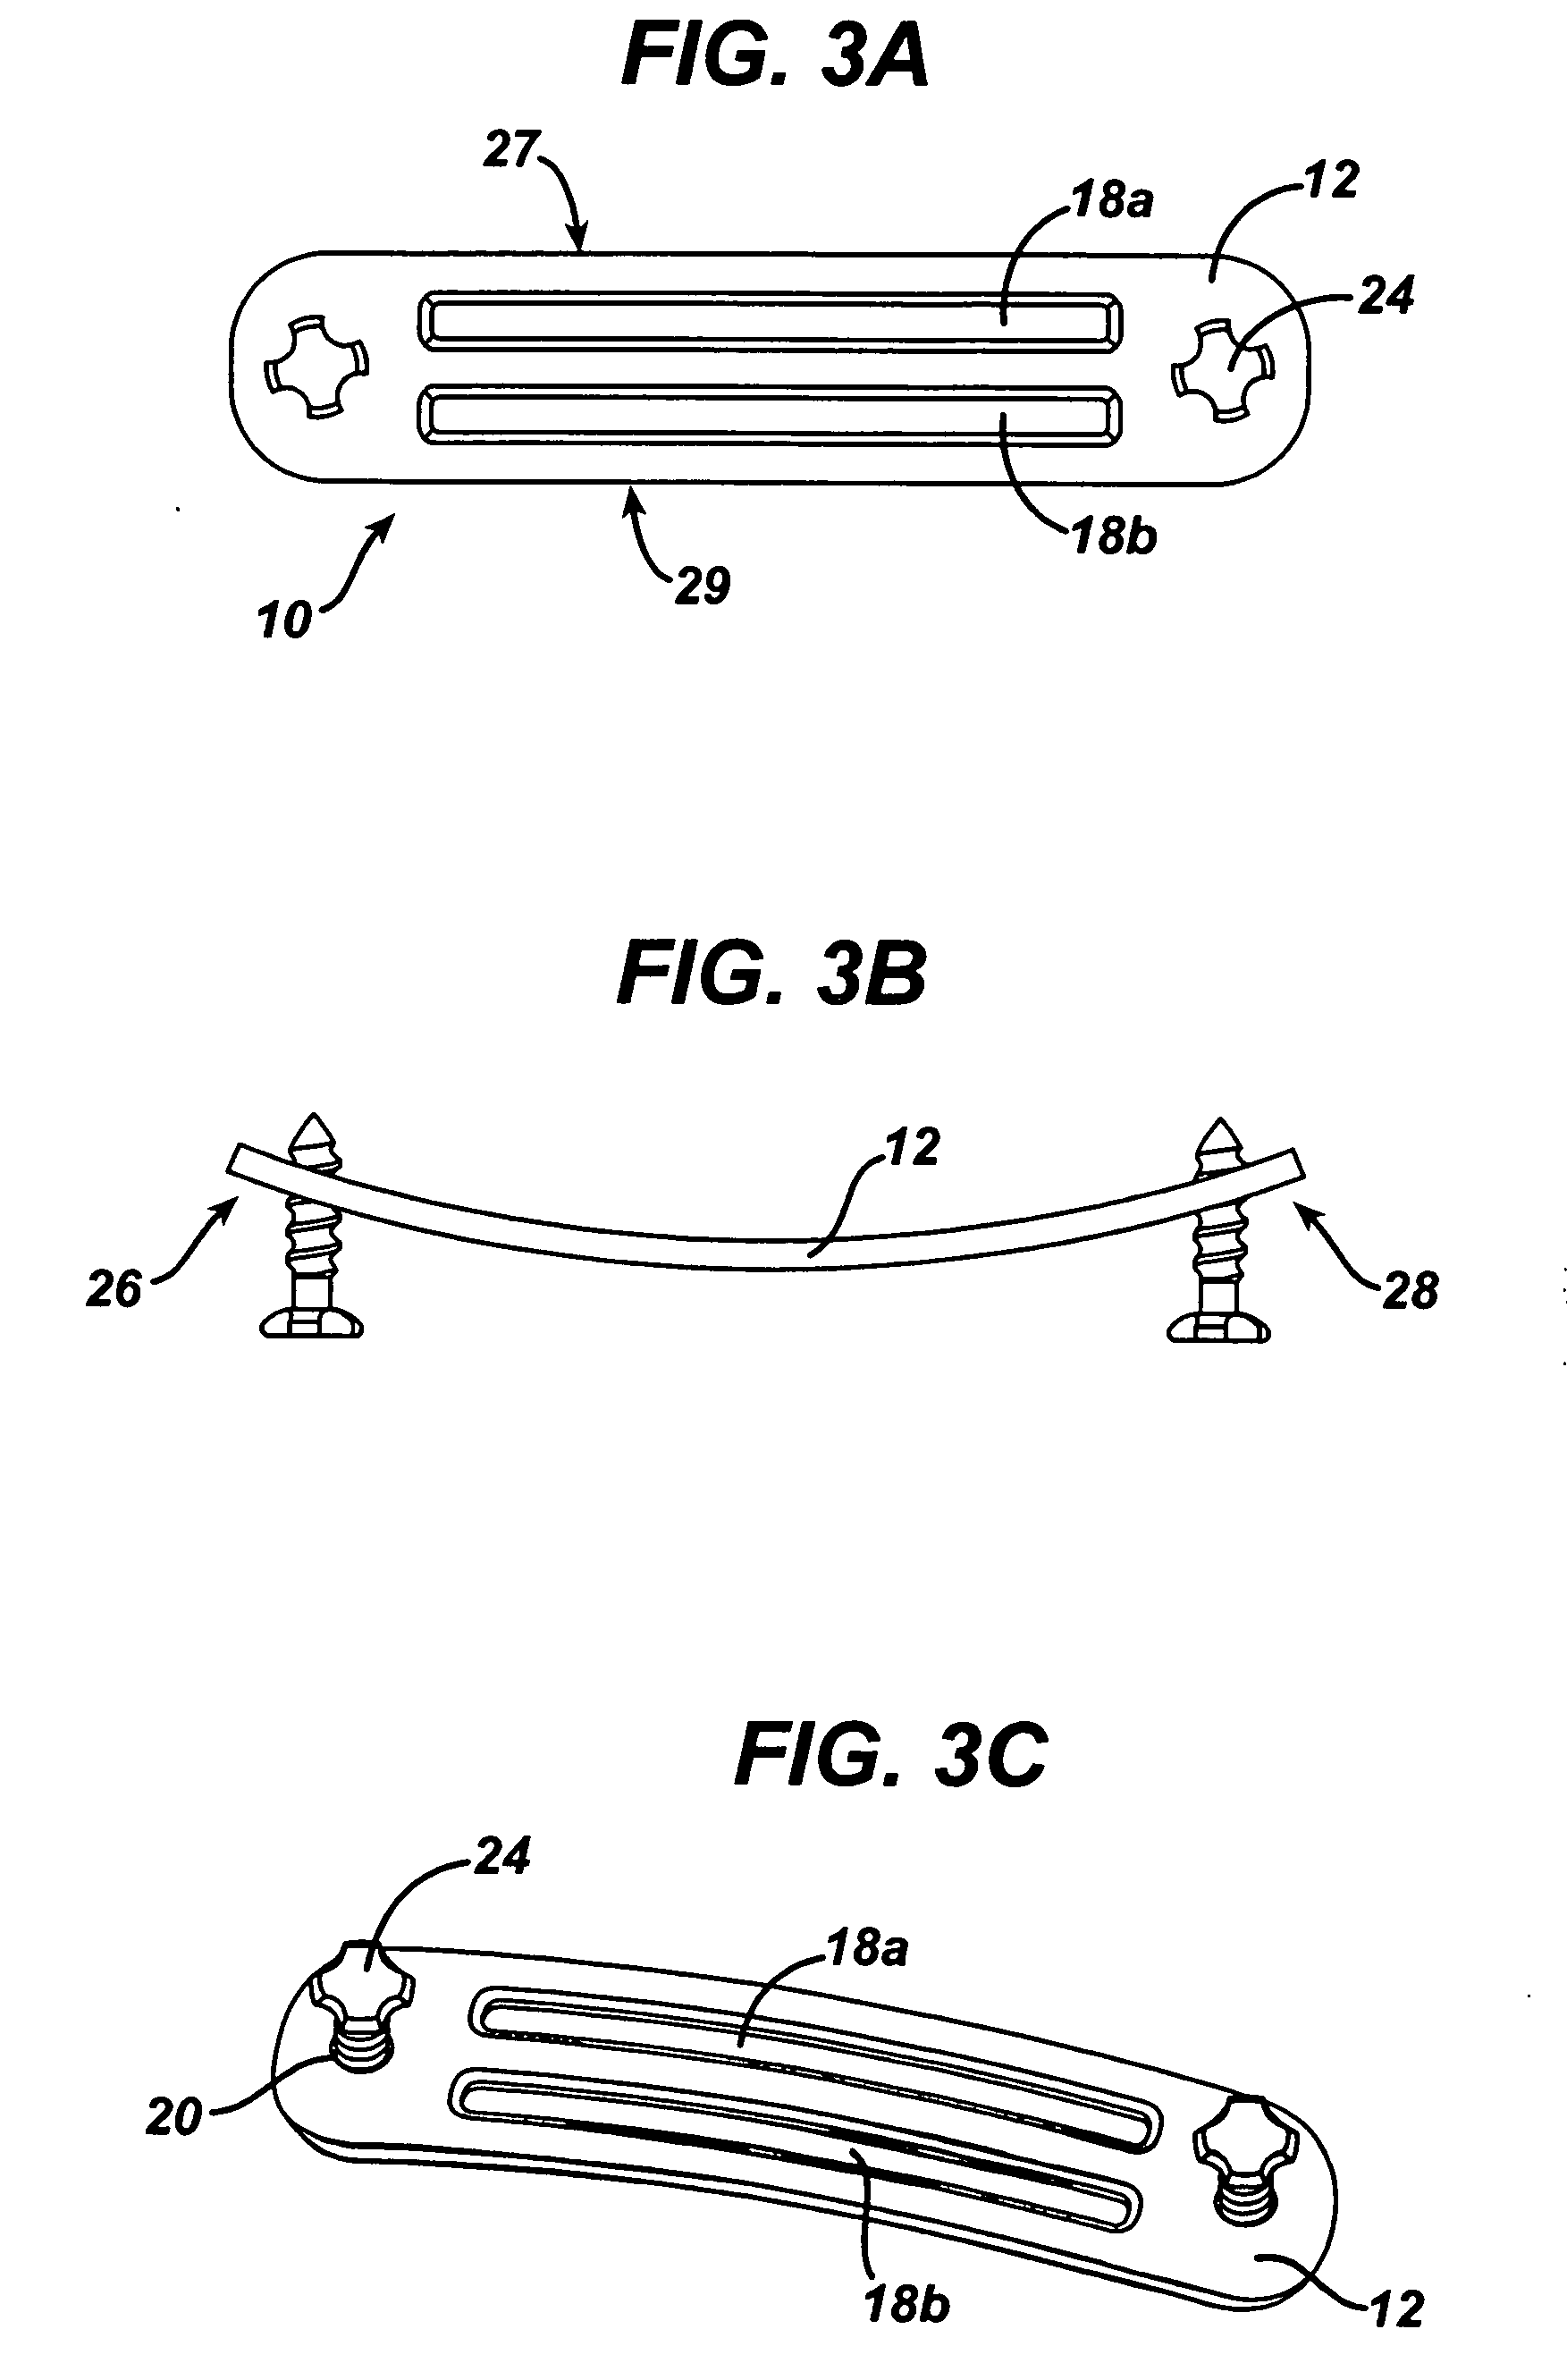 Implant fixation methods and apparatus